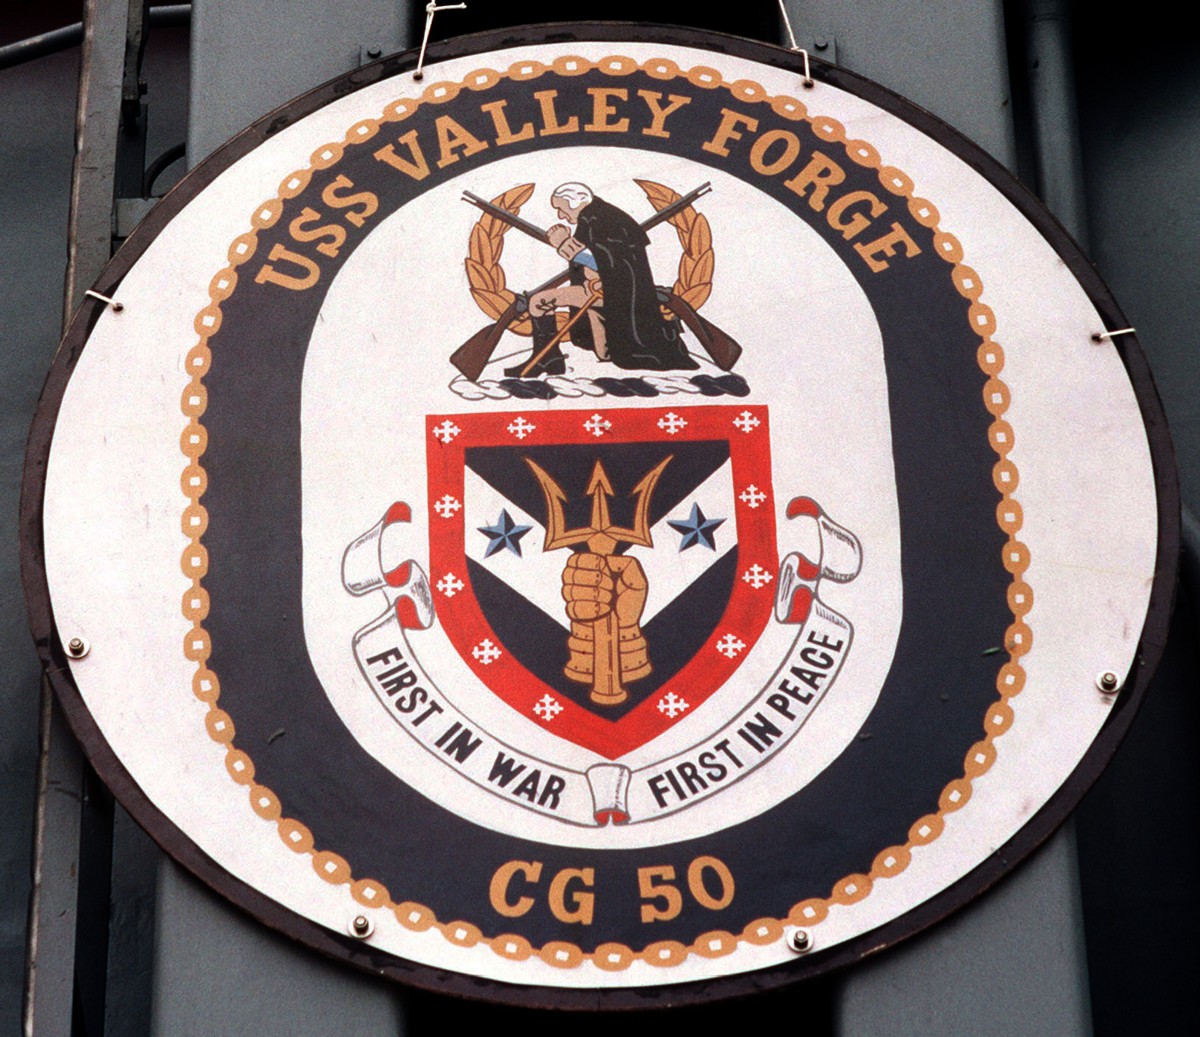 cg-50 uss valley forge insignia crest patch badge ticonderoga class guided missile cruiser aegis us navy 04c